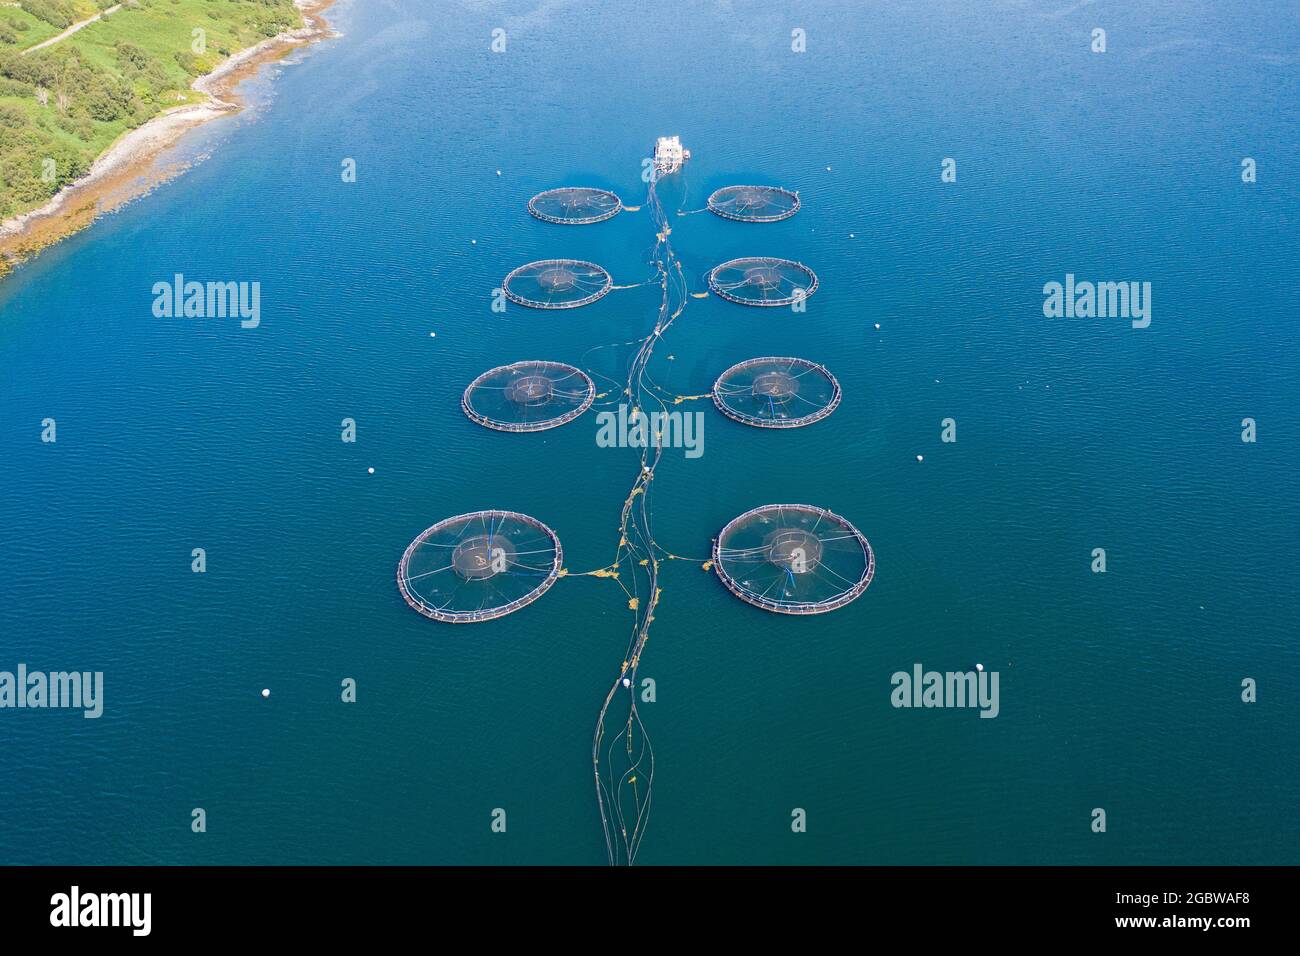 An aquaculture fish farm in Scotland providing farmed salmon, trout and other fish produce for market, these are controversial fishing methods. Stock Photo